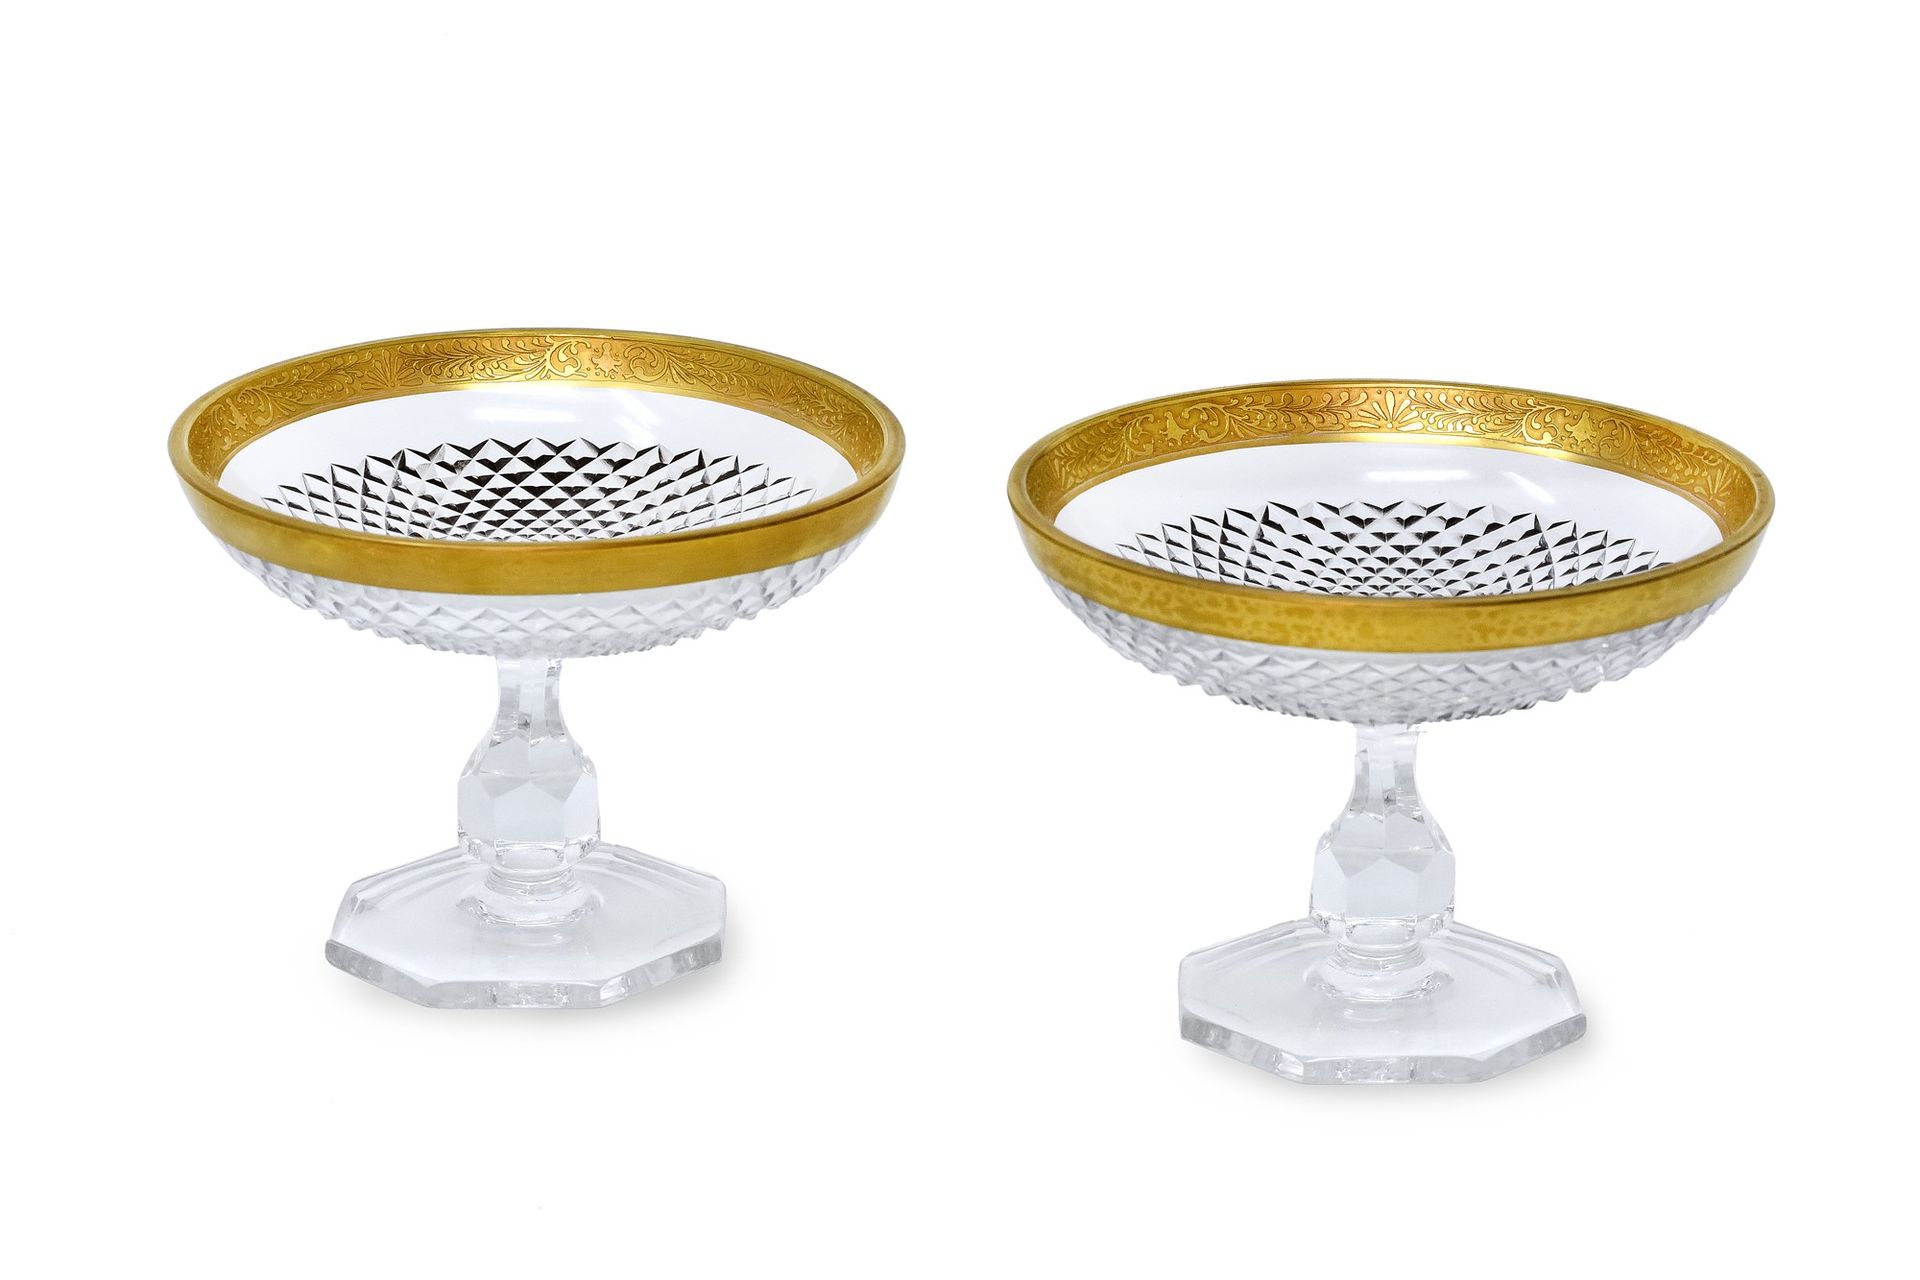 Null Lot consisting of two Baccarat crystal worked risers with golden profile.

&hellip;